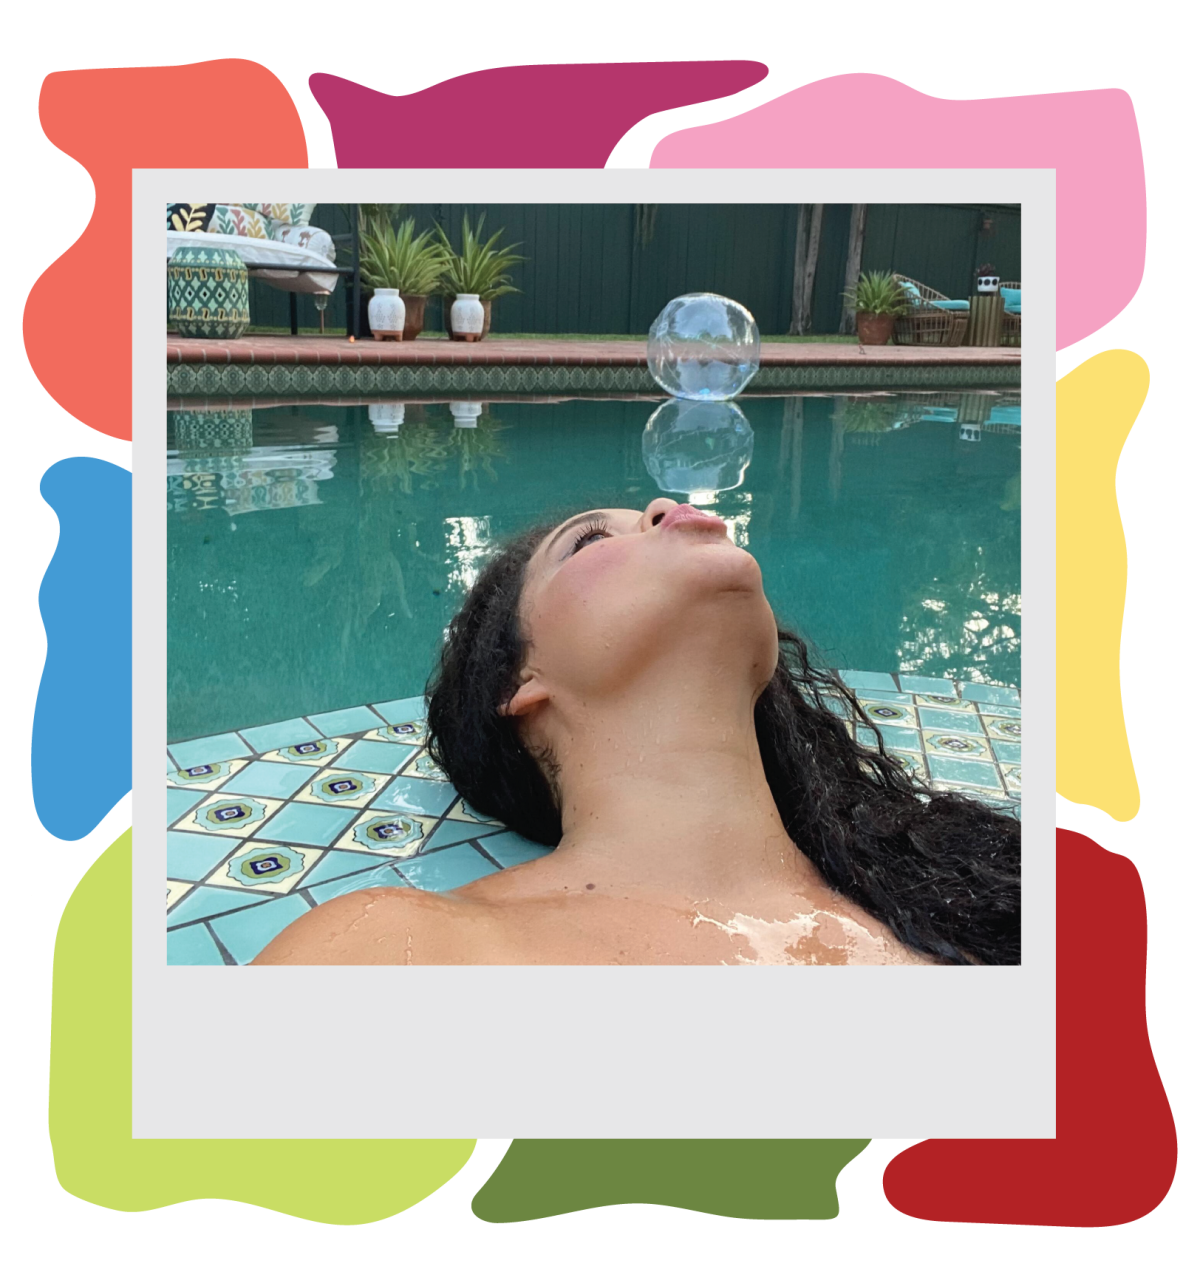 Photographic illustration of a Polaroid image of a woman next to a pool with colorful shapes bordering the image from behind.